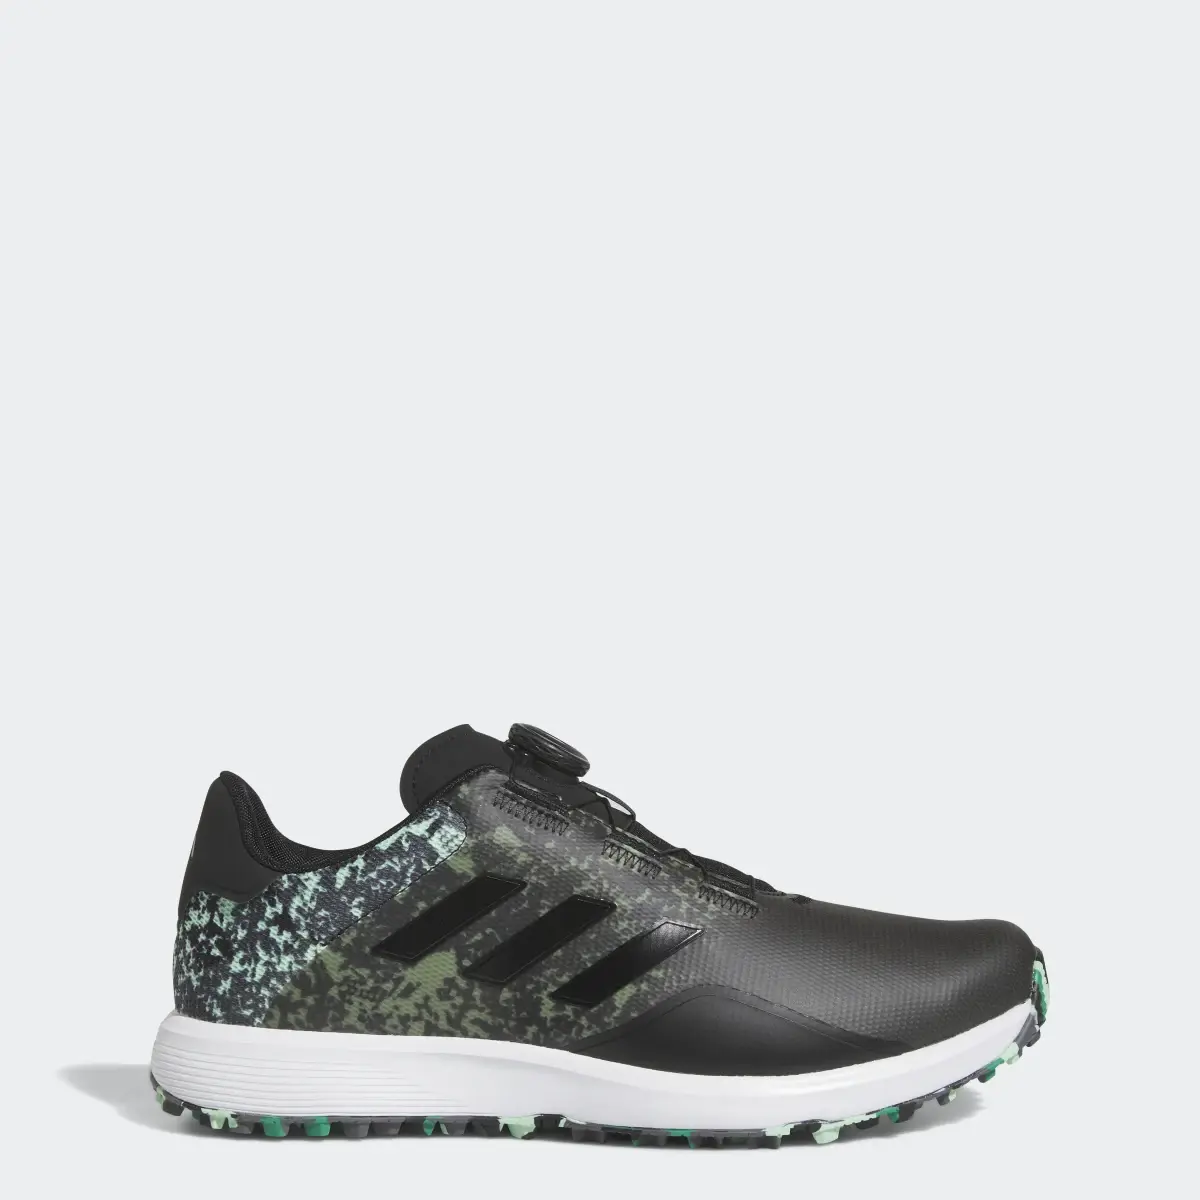 Adidas S2G SL 23 Wide Golf Shoes. 1